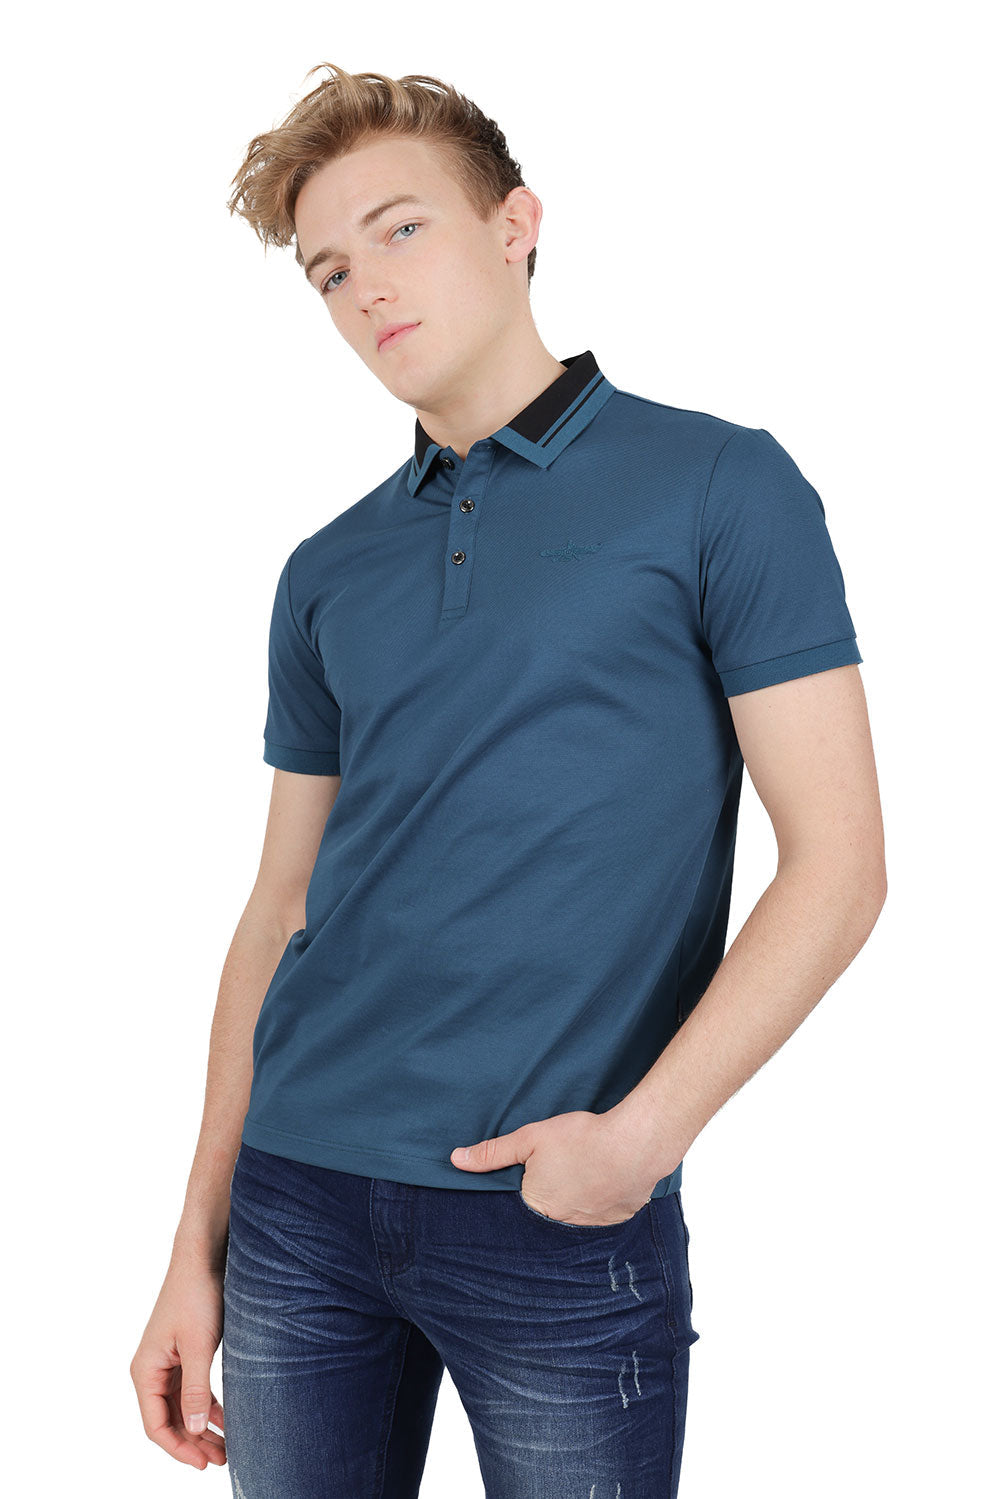 Barabas Men's Solid Color Luxury Short Sleeves Polo Shirts PP824 Teal